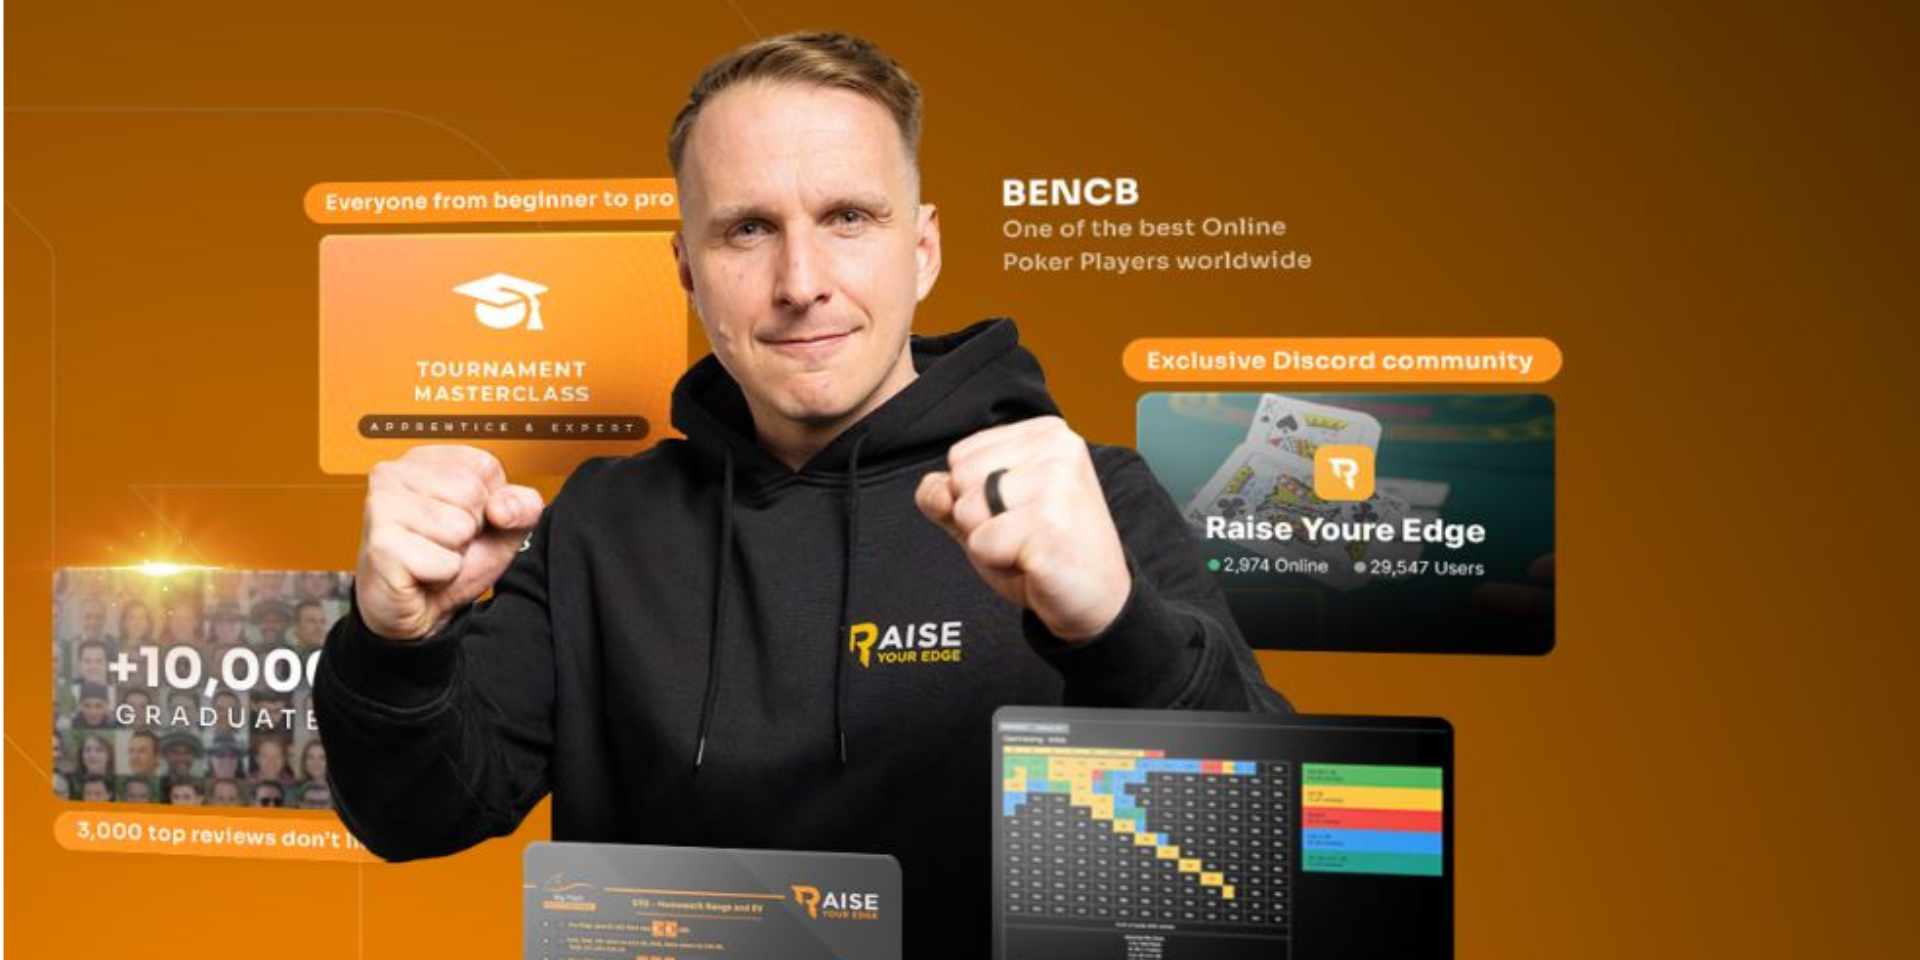 the tournament masterclass expert level course by raise your edge - review